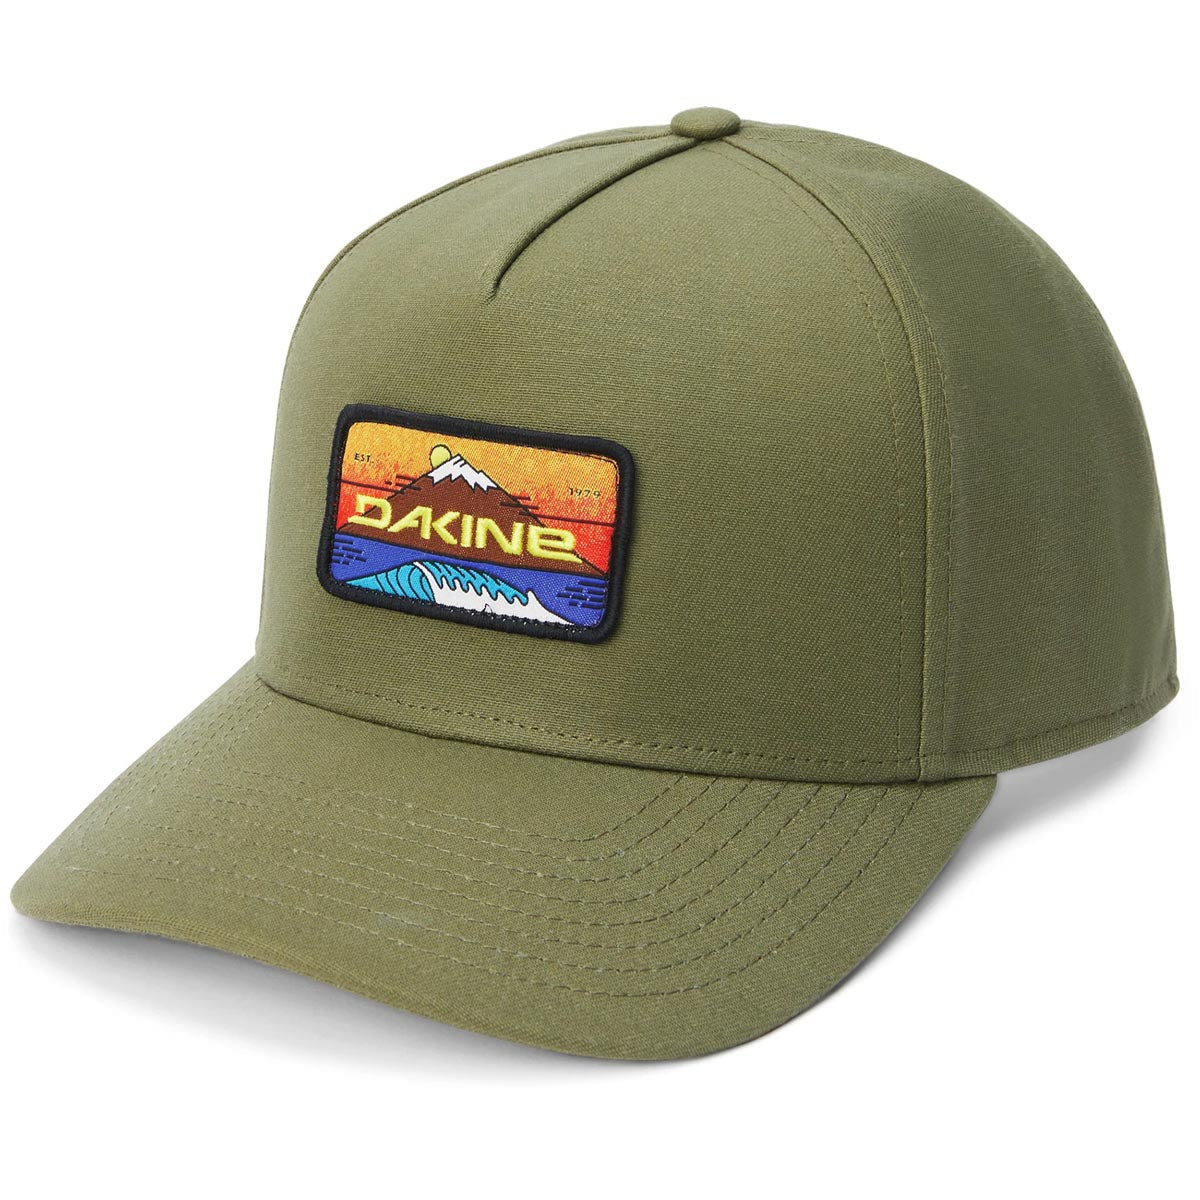 Dakine All Sports Patch Ball Hat - Dusky Green image 1